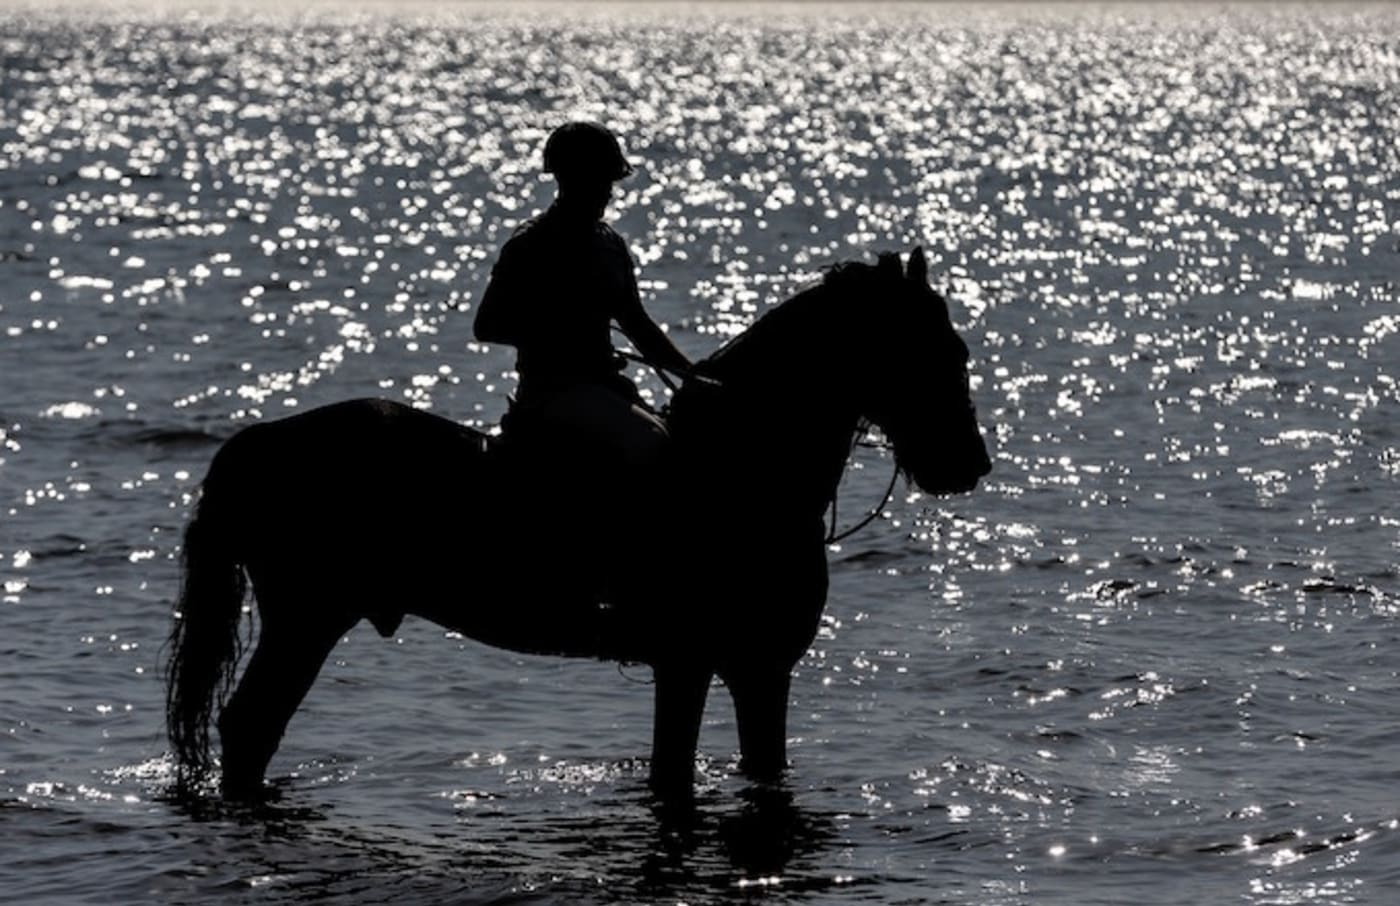 Silhouette of a Turkish Armed Forces' personnel on horseback by the sea in Bursa, Turkey.